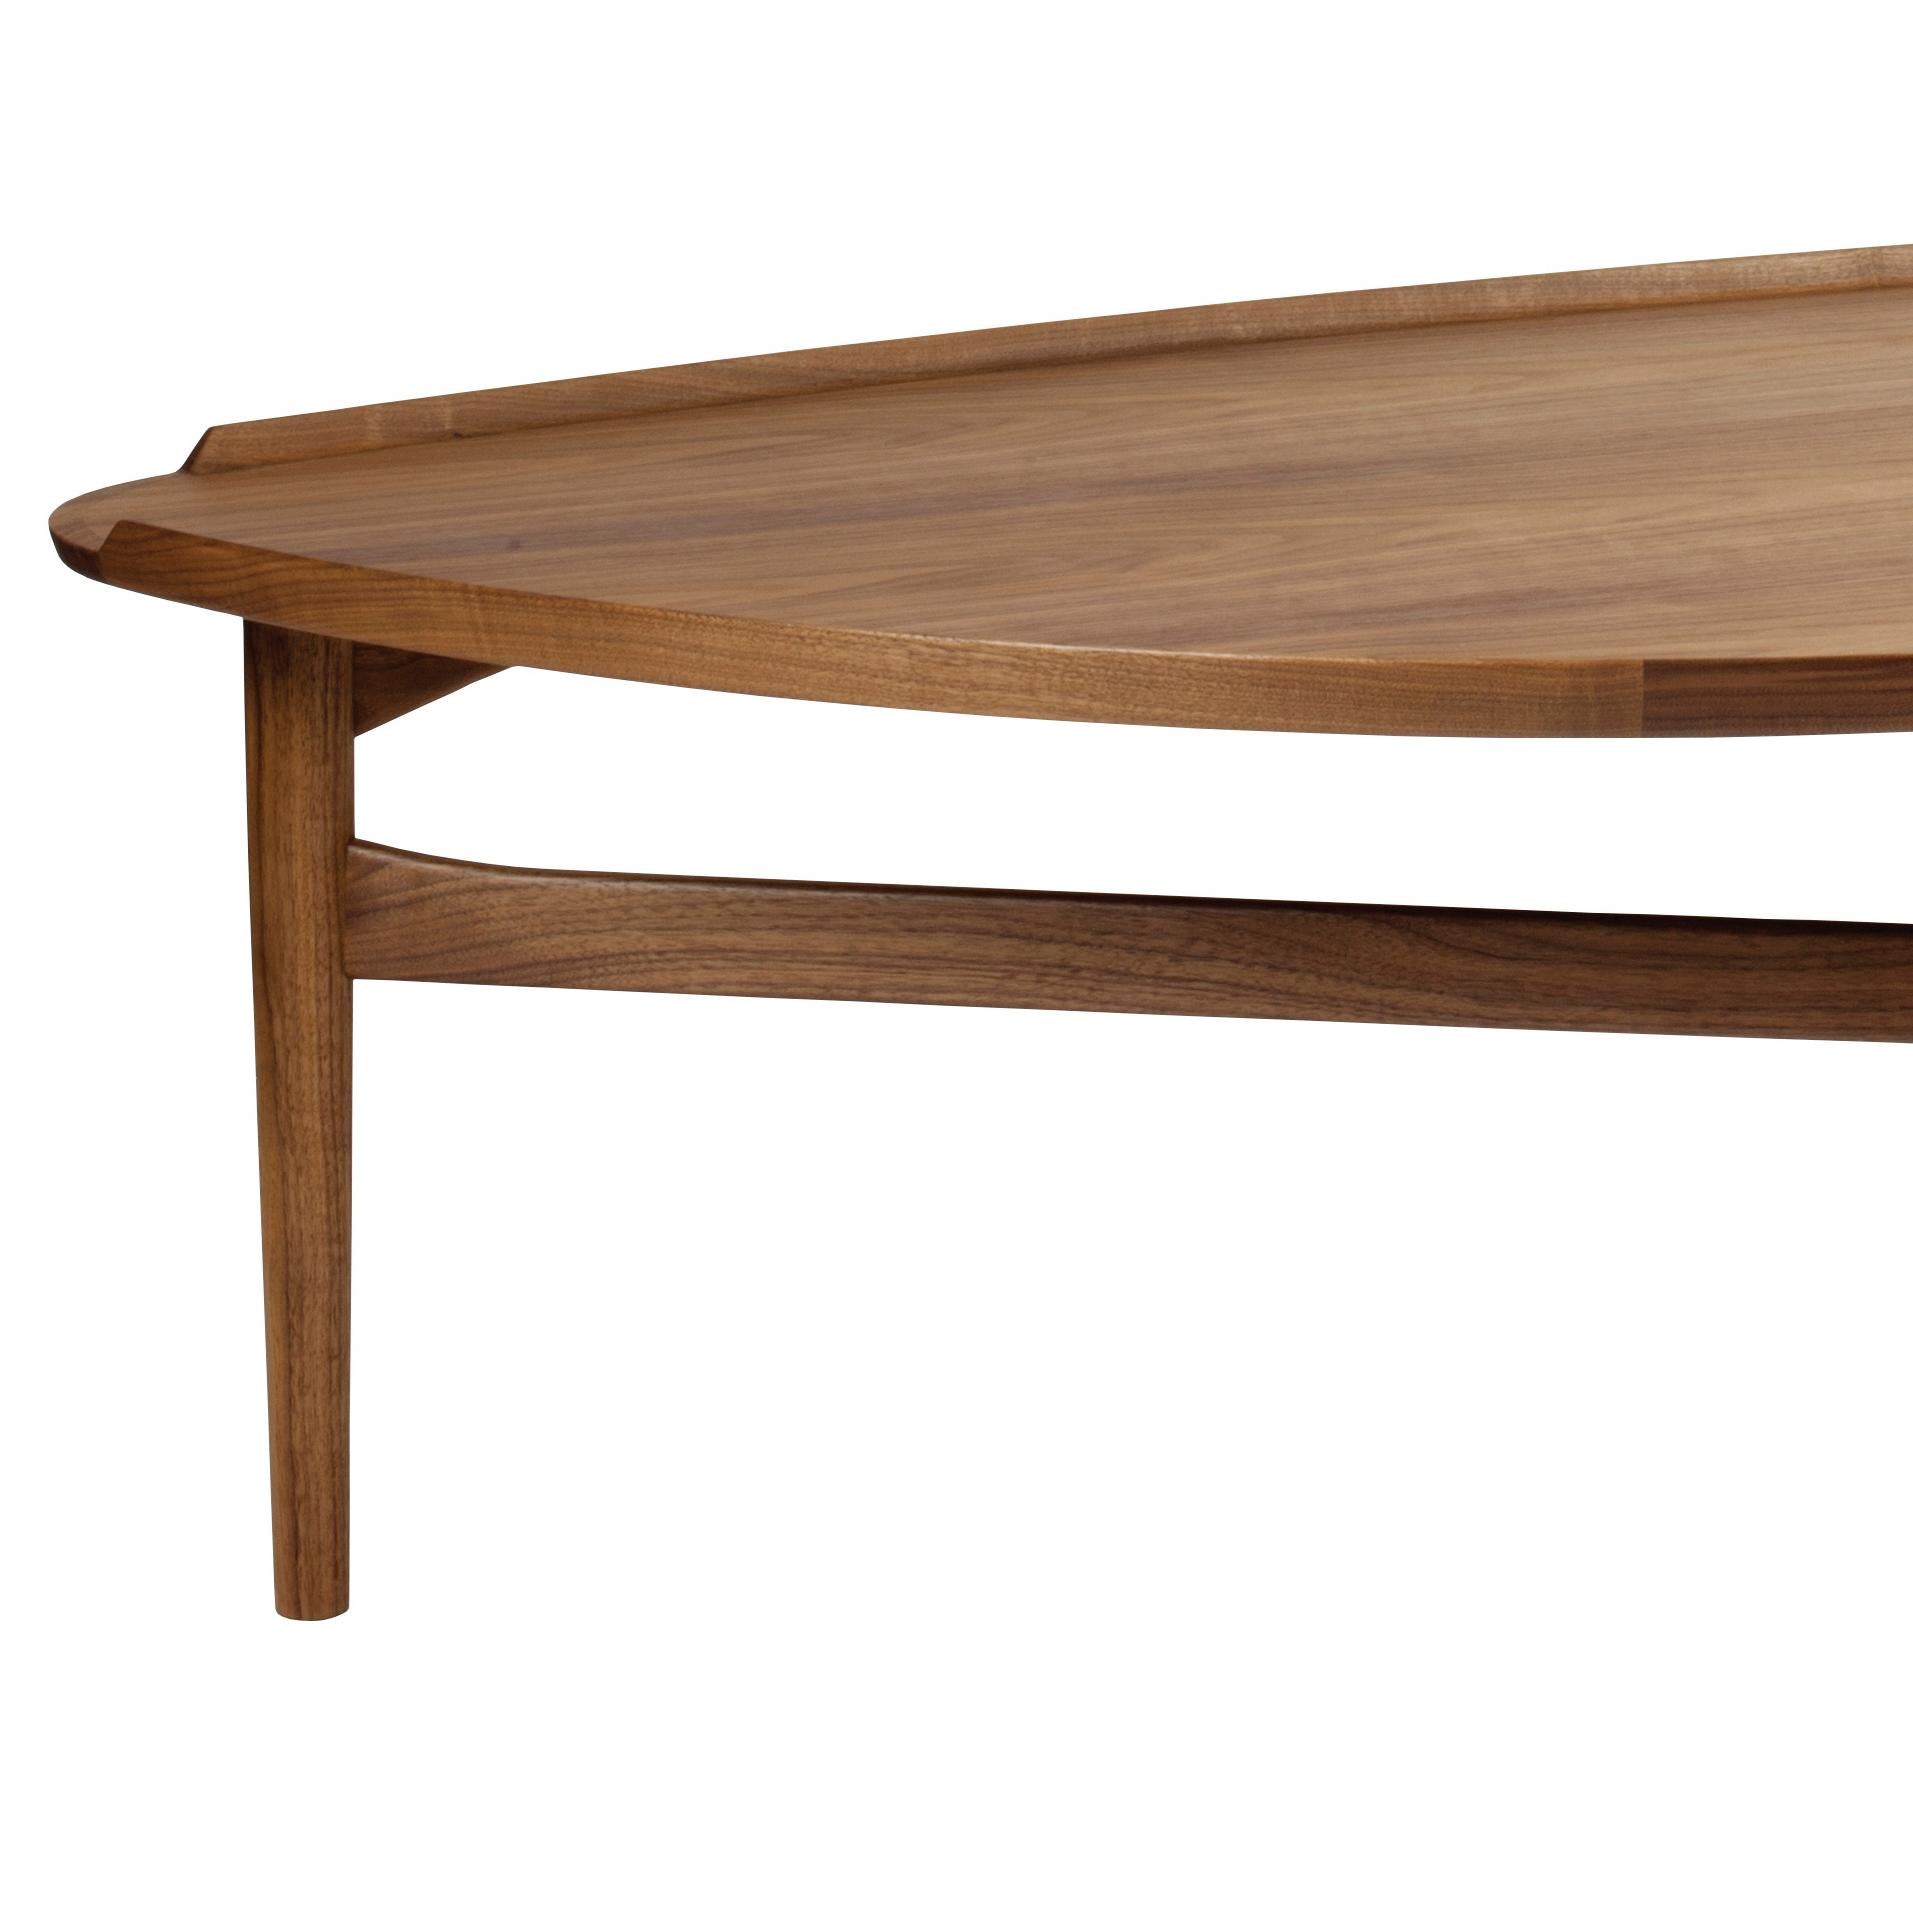 Table designed by Finn Jhul
Manufactured by One collection Finn Juhl (Denmark)

Finn Juhl’s Cocktail table was designed for Baker Furniture in the United States to match the sculptural Baker Sofa.

The elegant, three-legged coffee table is a